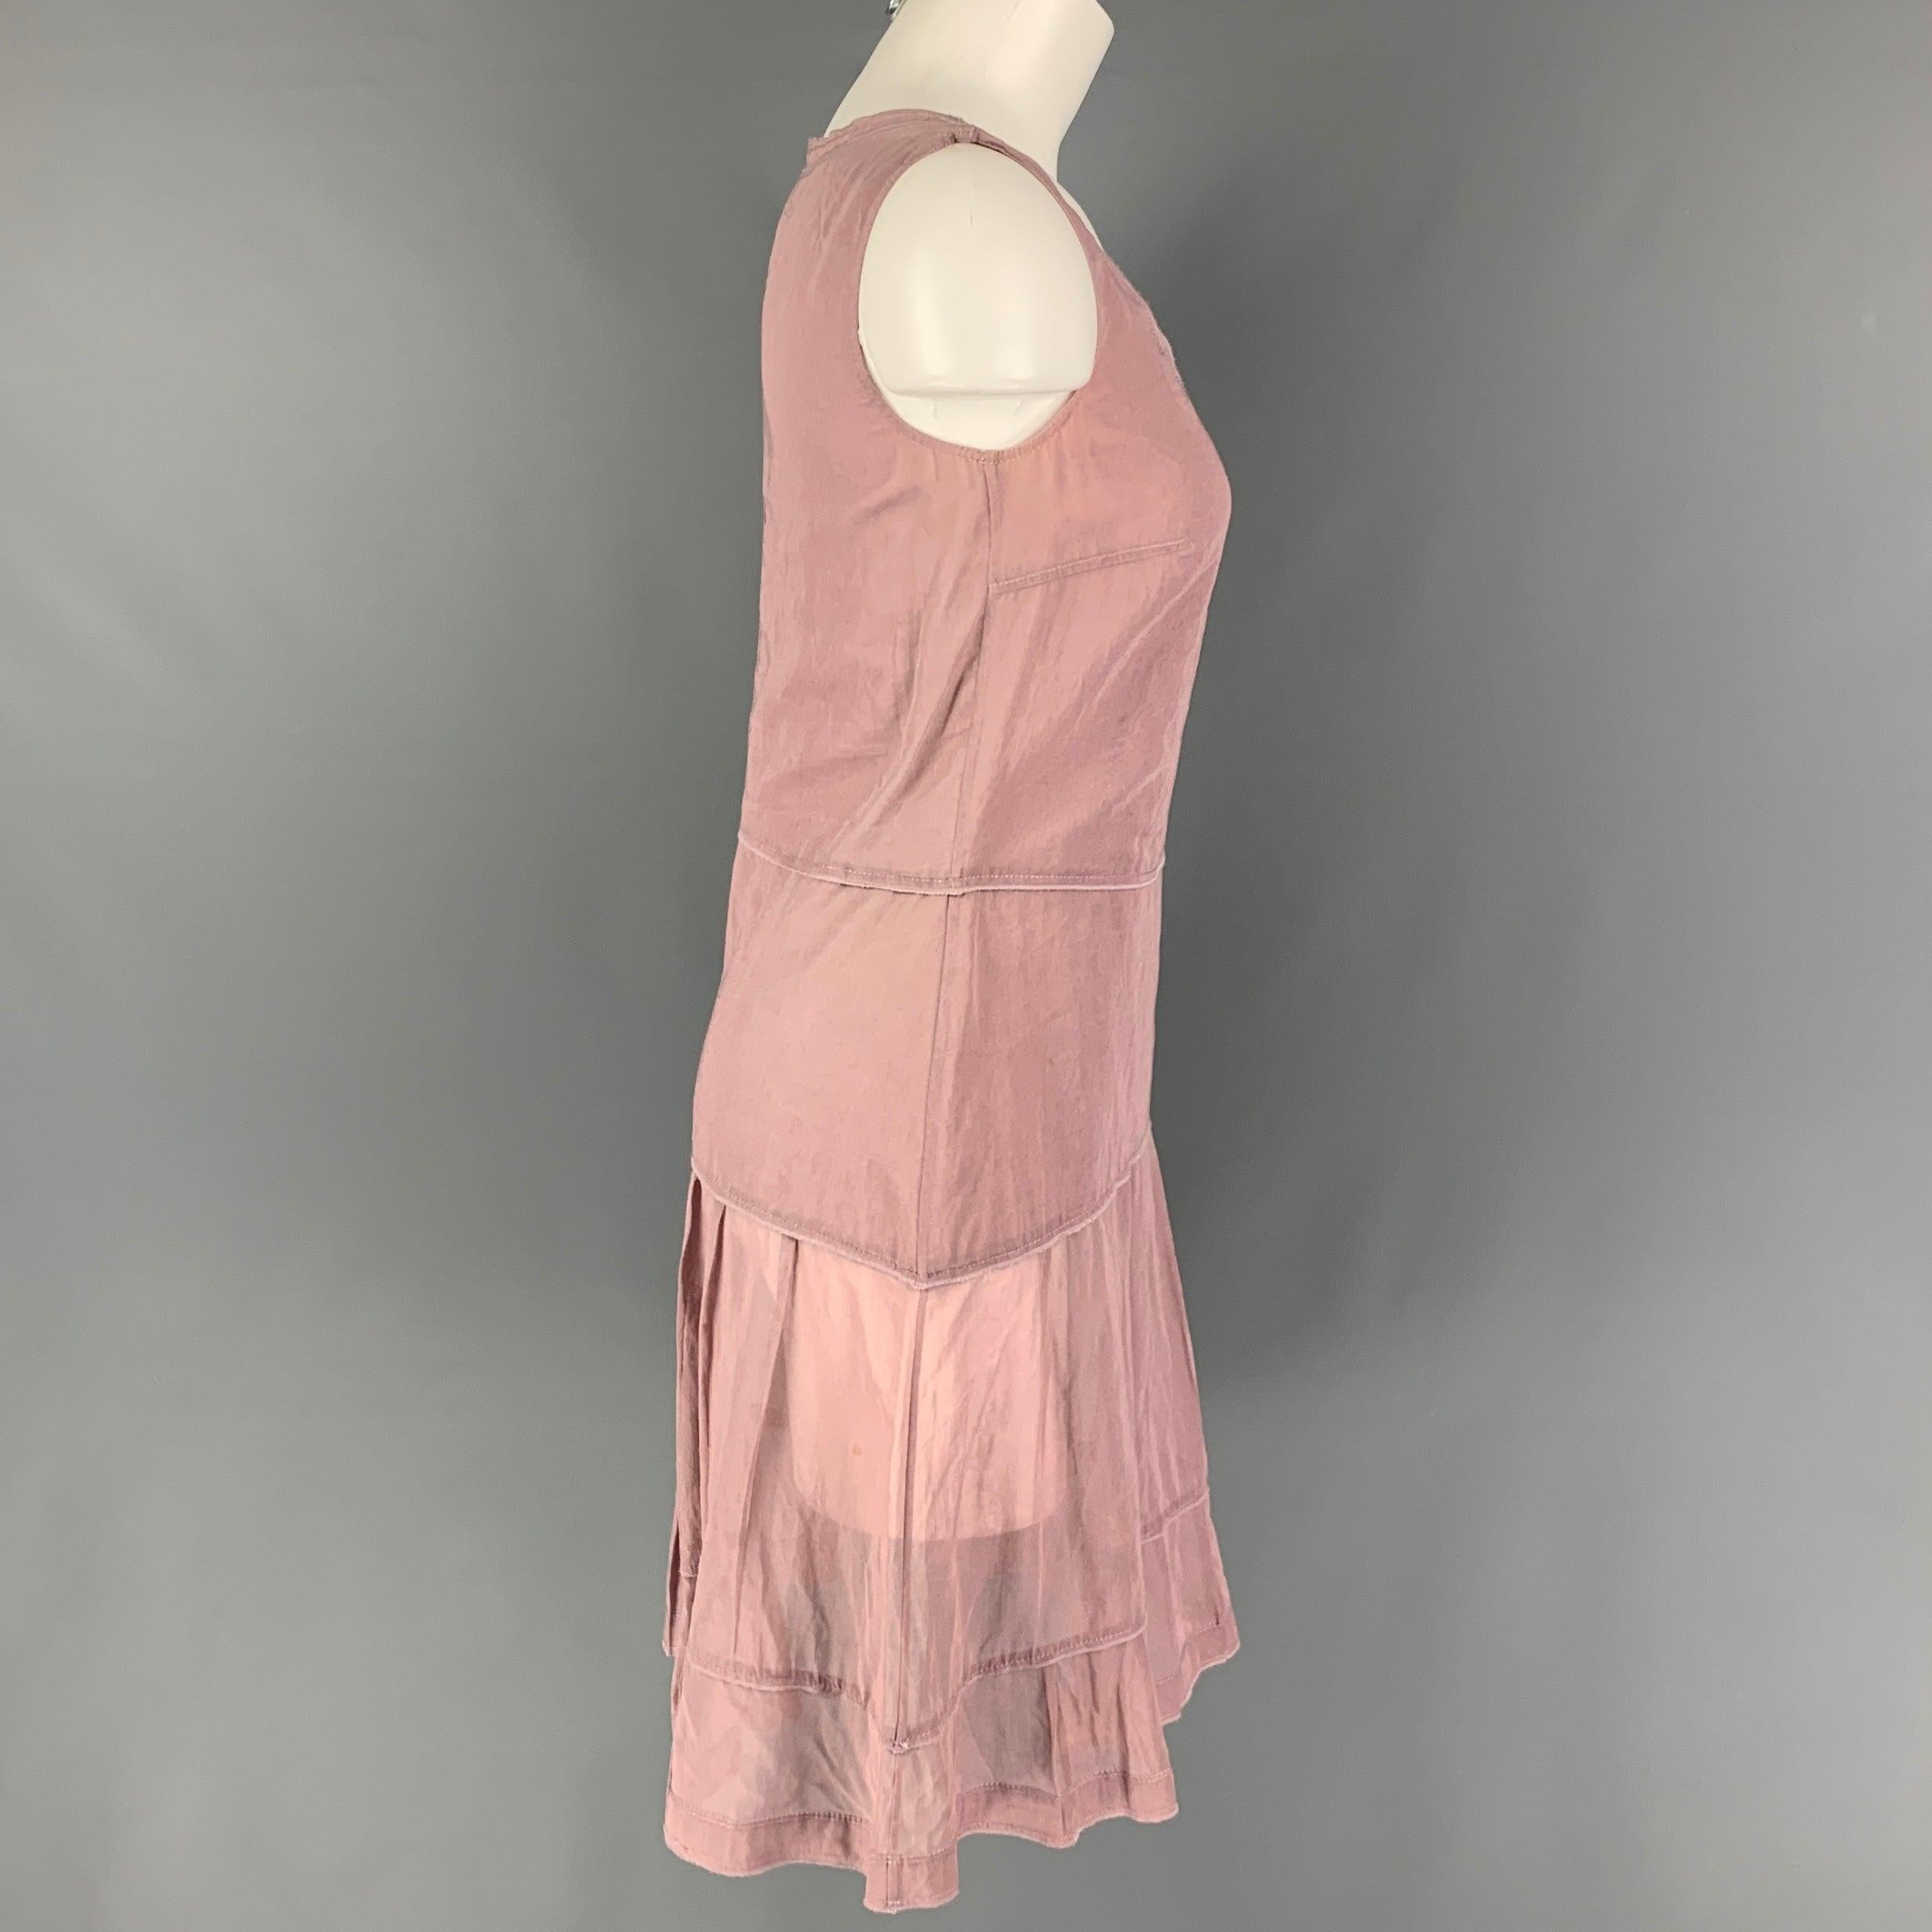 JIL SANDER dress comes in a dust pink cotton featuring a pleated style, double layered, sleeveless, and a side zipper closure. Made in Italy.
Good
Pre-Owned Condition. Small mark at front. As-Is.  

Marked:   36 

Measurements: 
 
Shoulder: 13